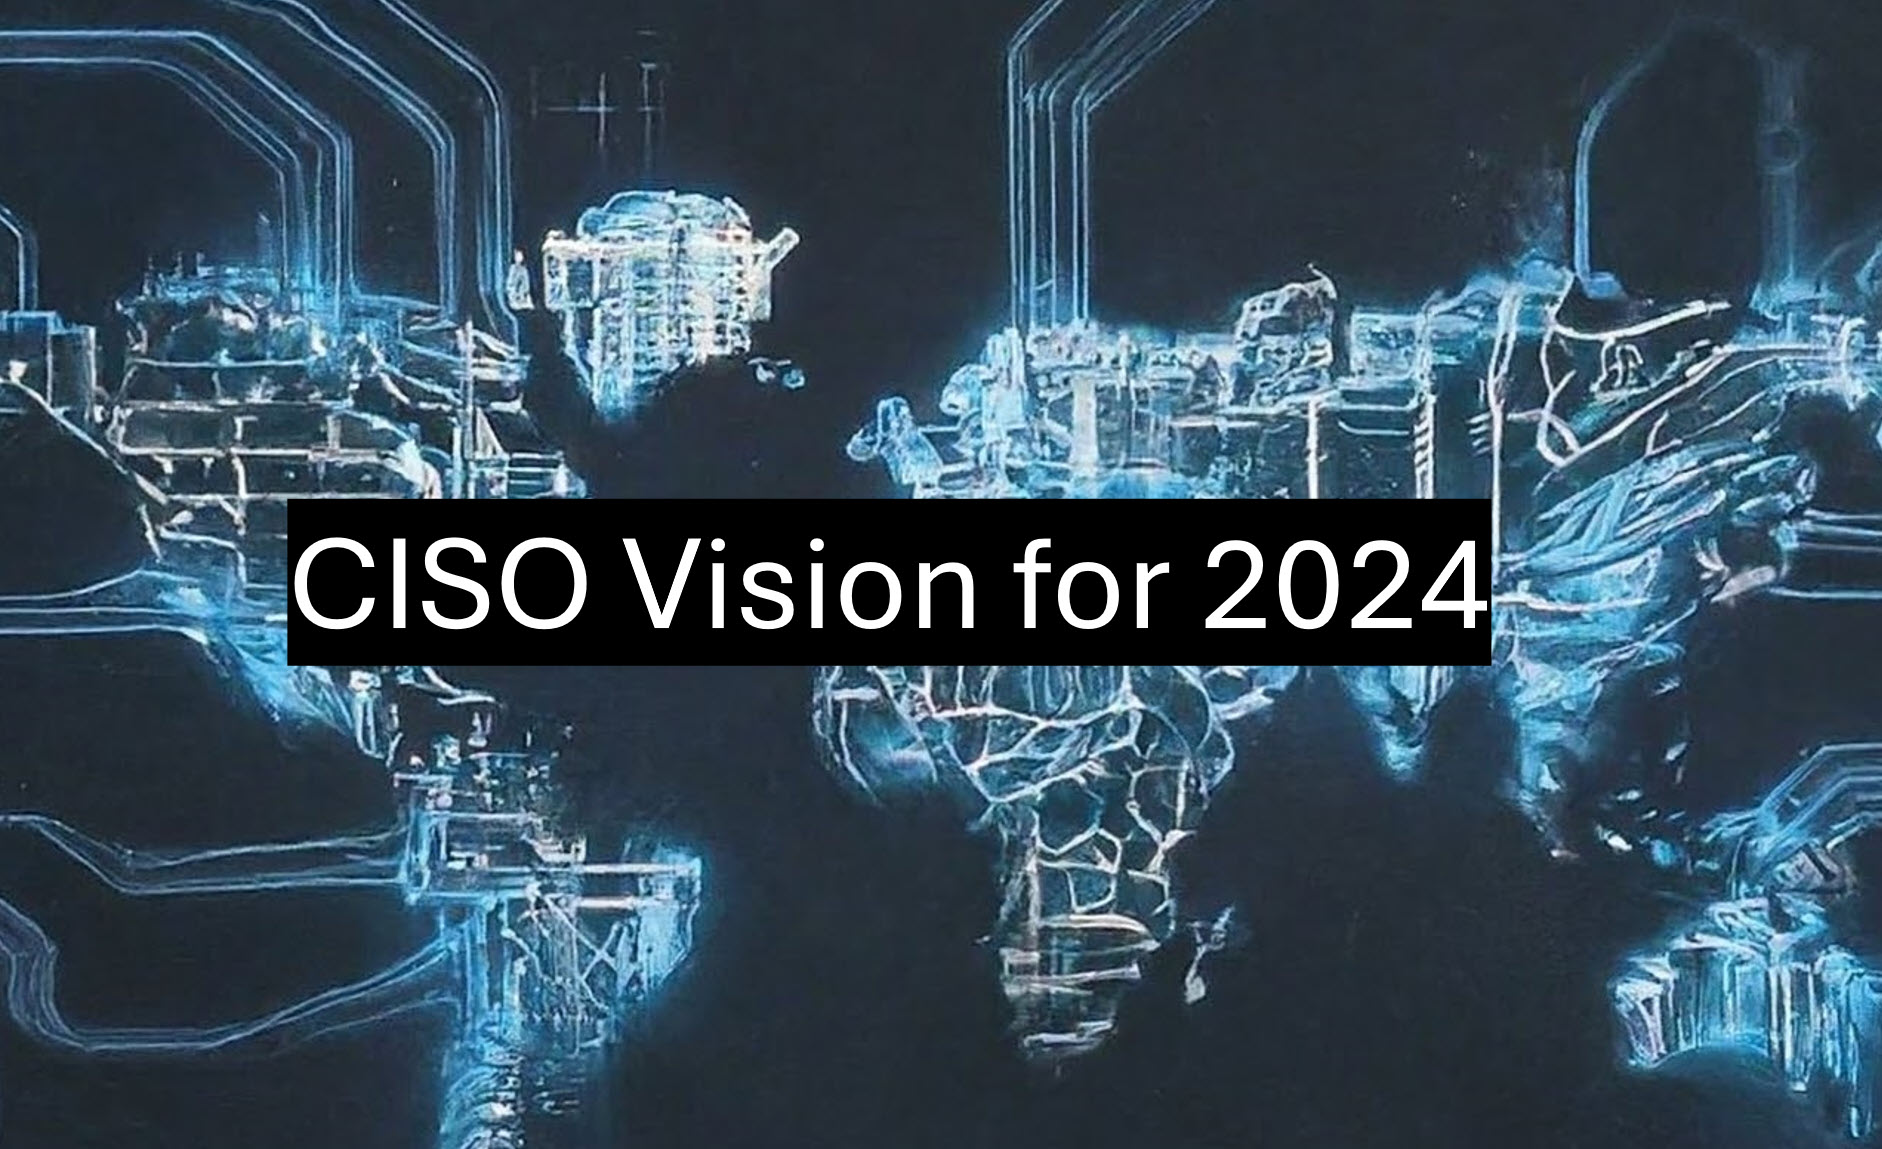 CISO Vision for 2024